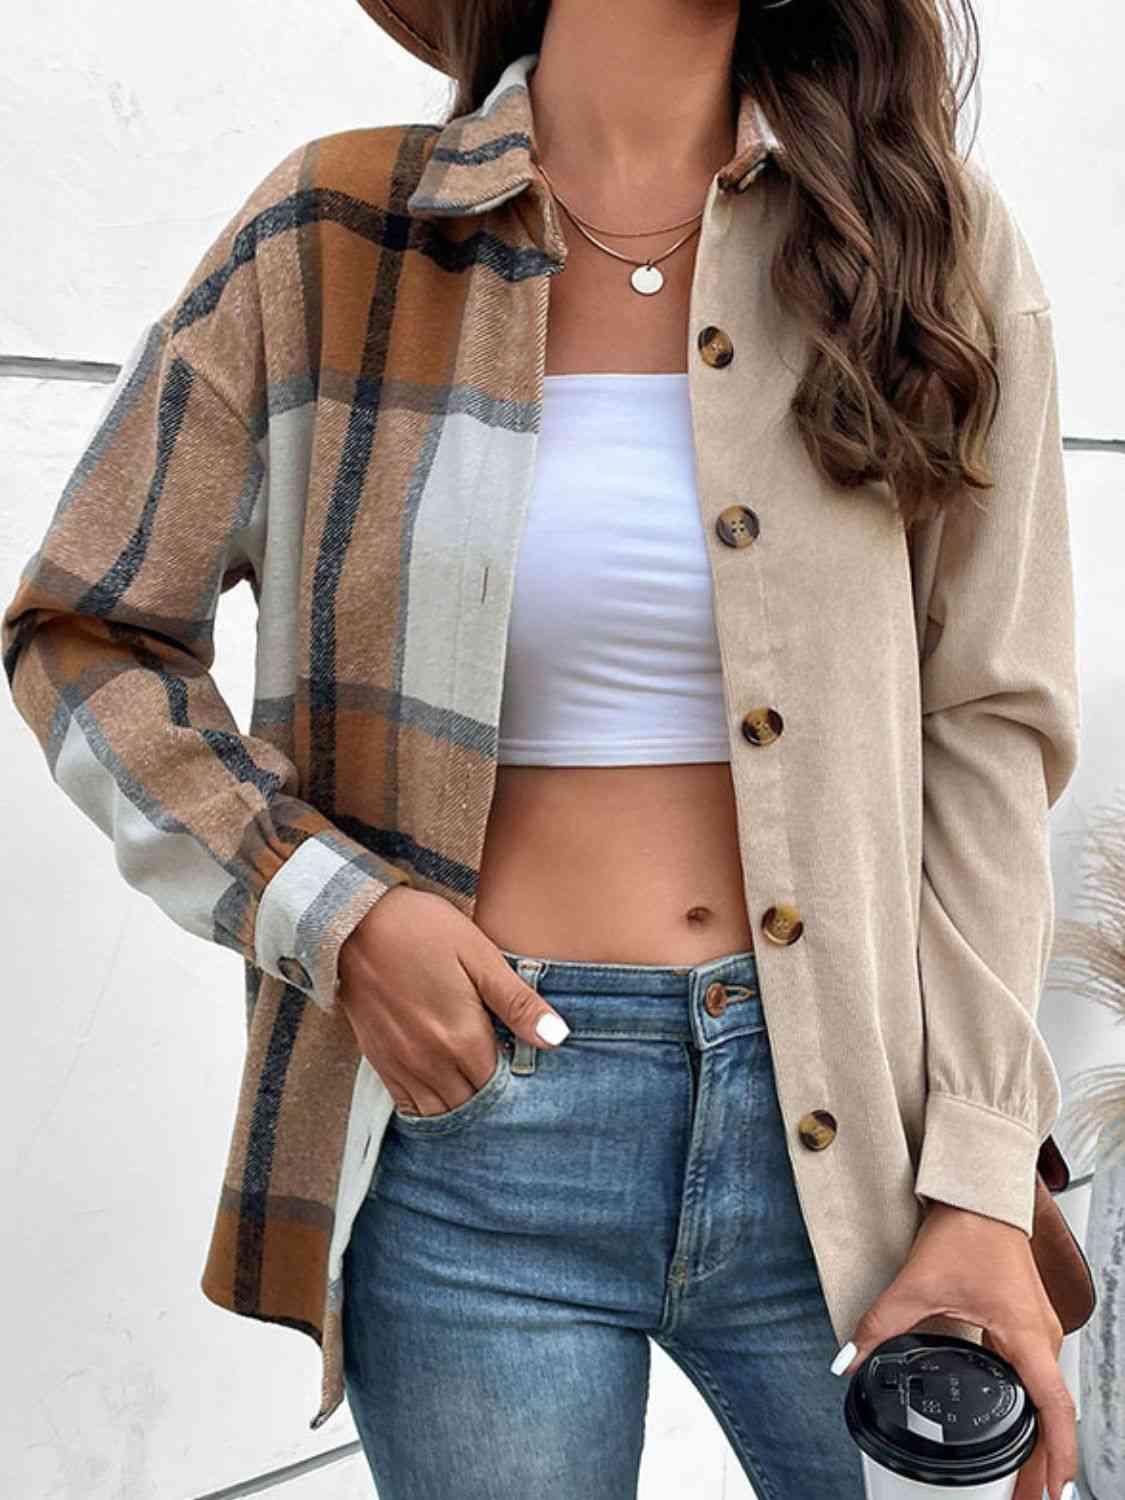 a woman wearing a tan jacket and jeans